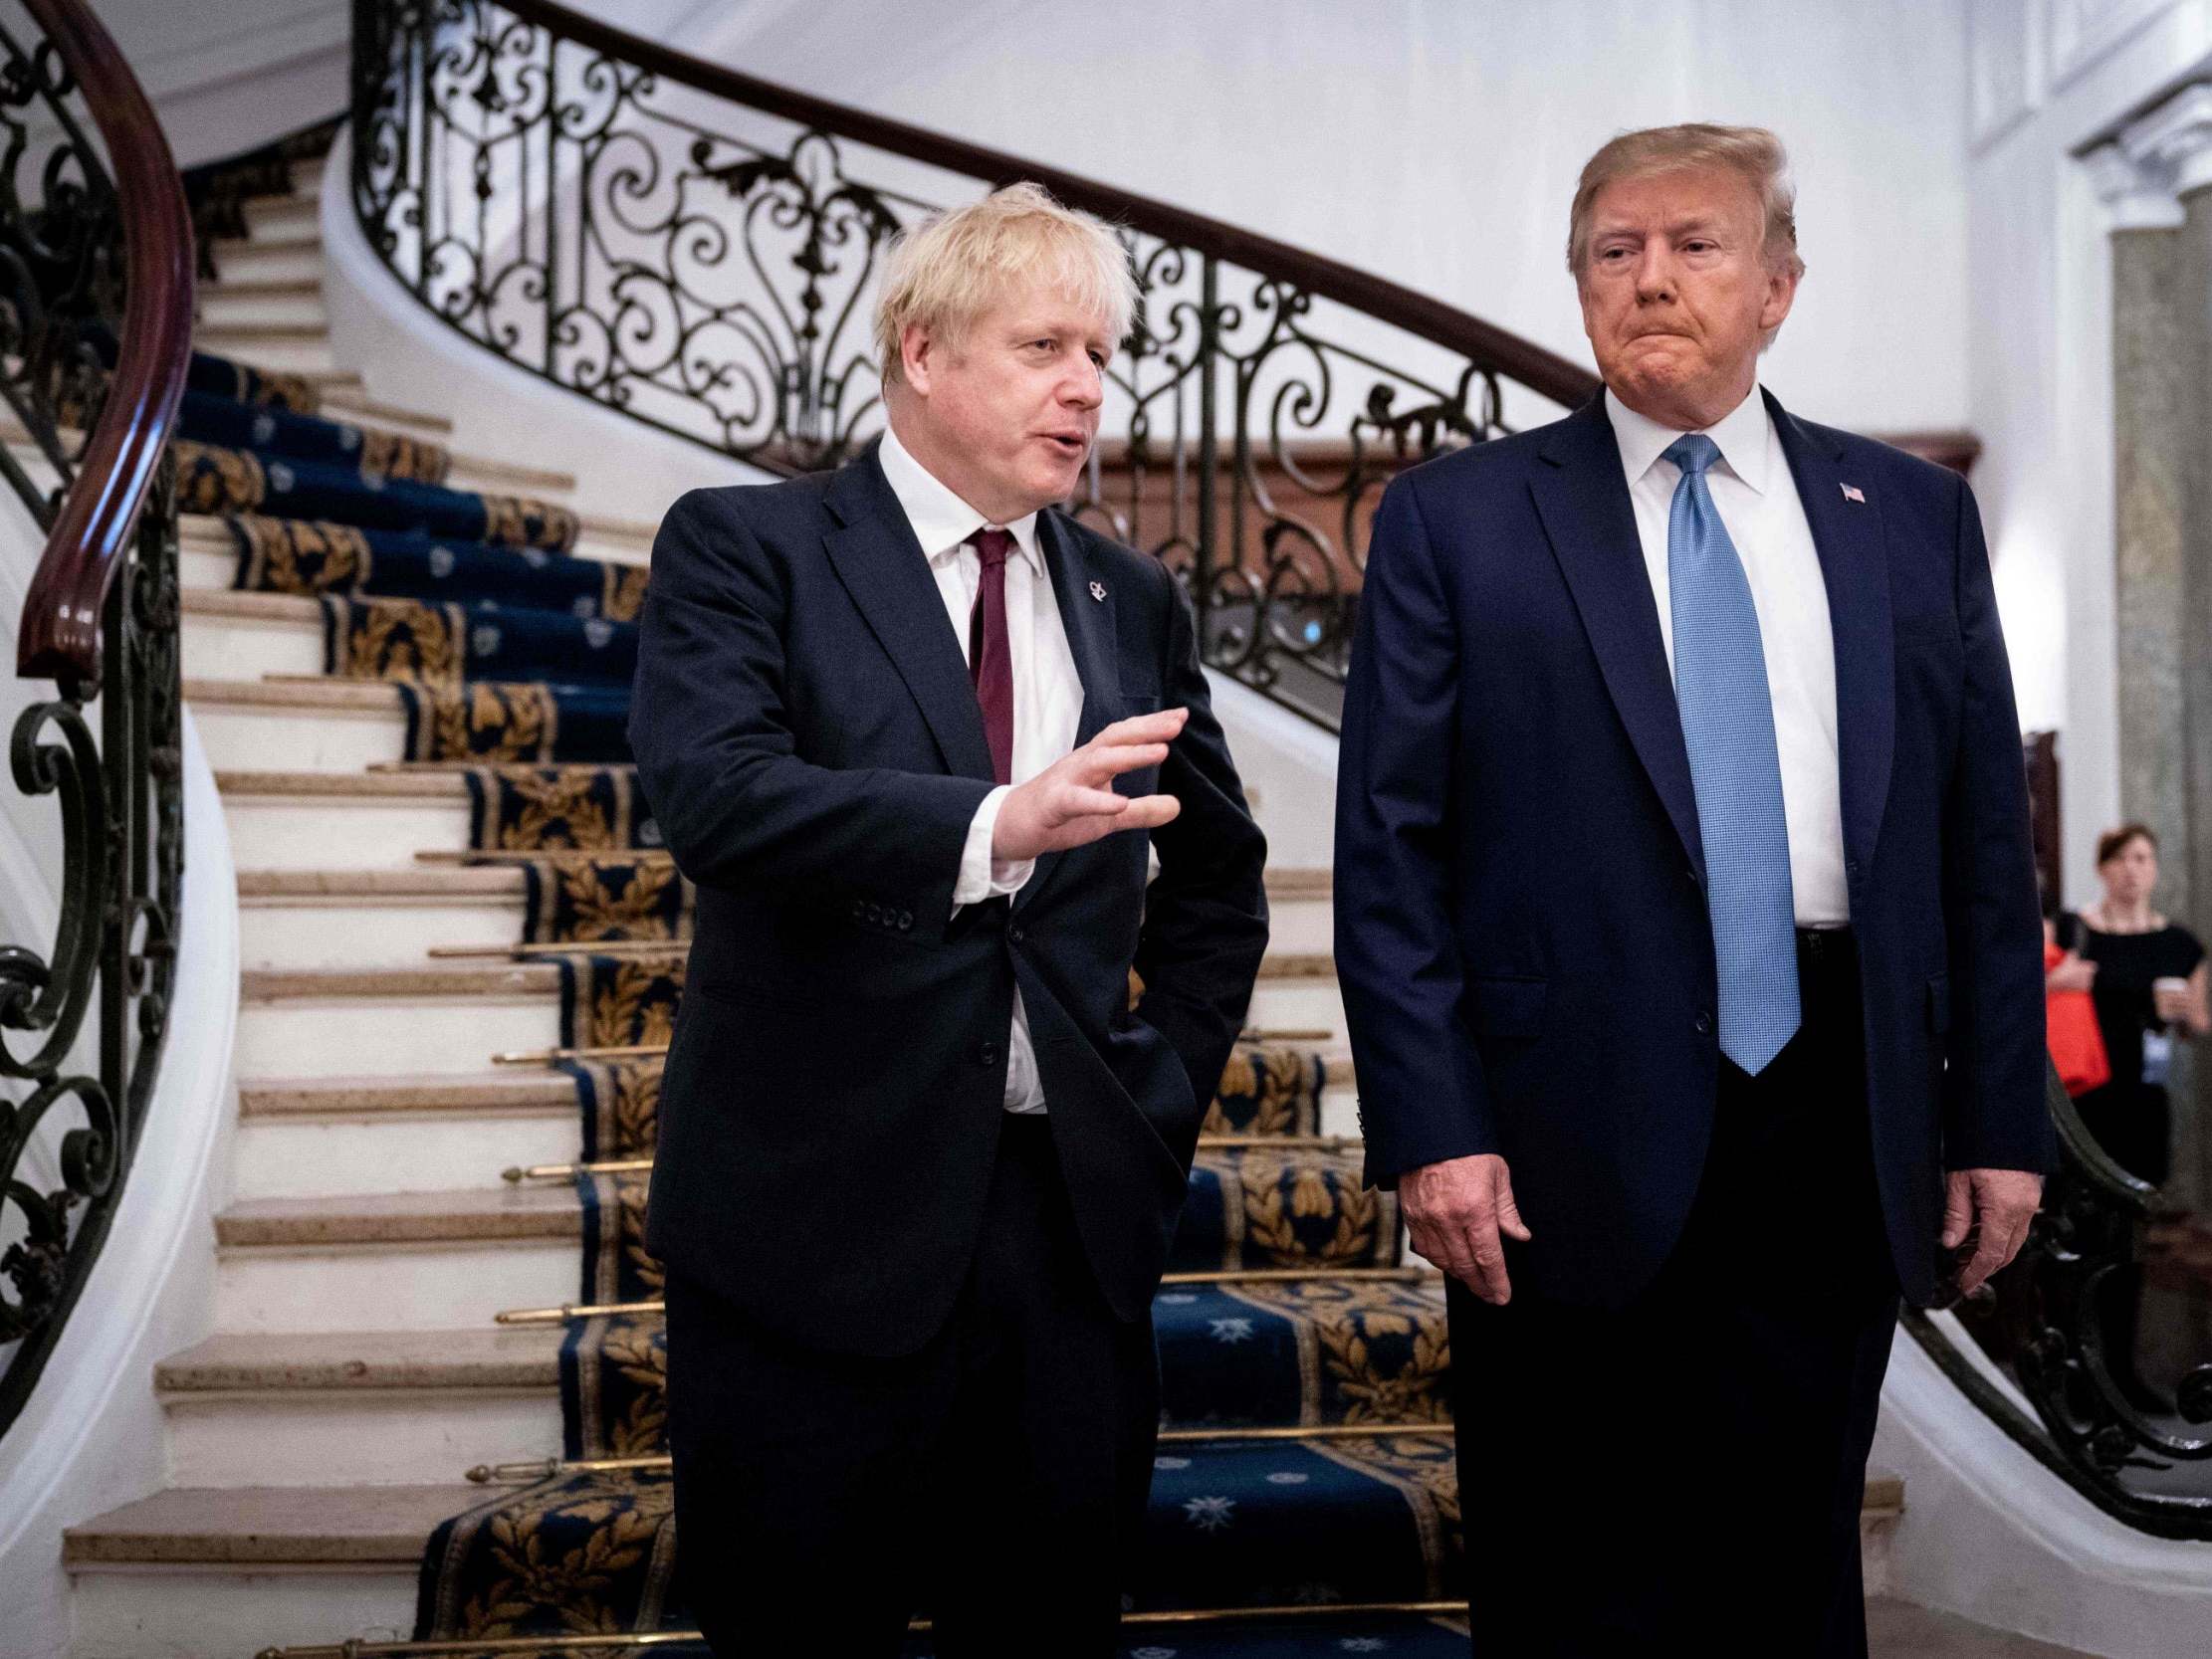 Might treason be a word that comes back to haunt both Trump and Johnson?